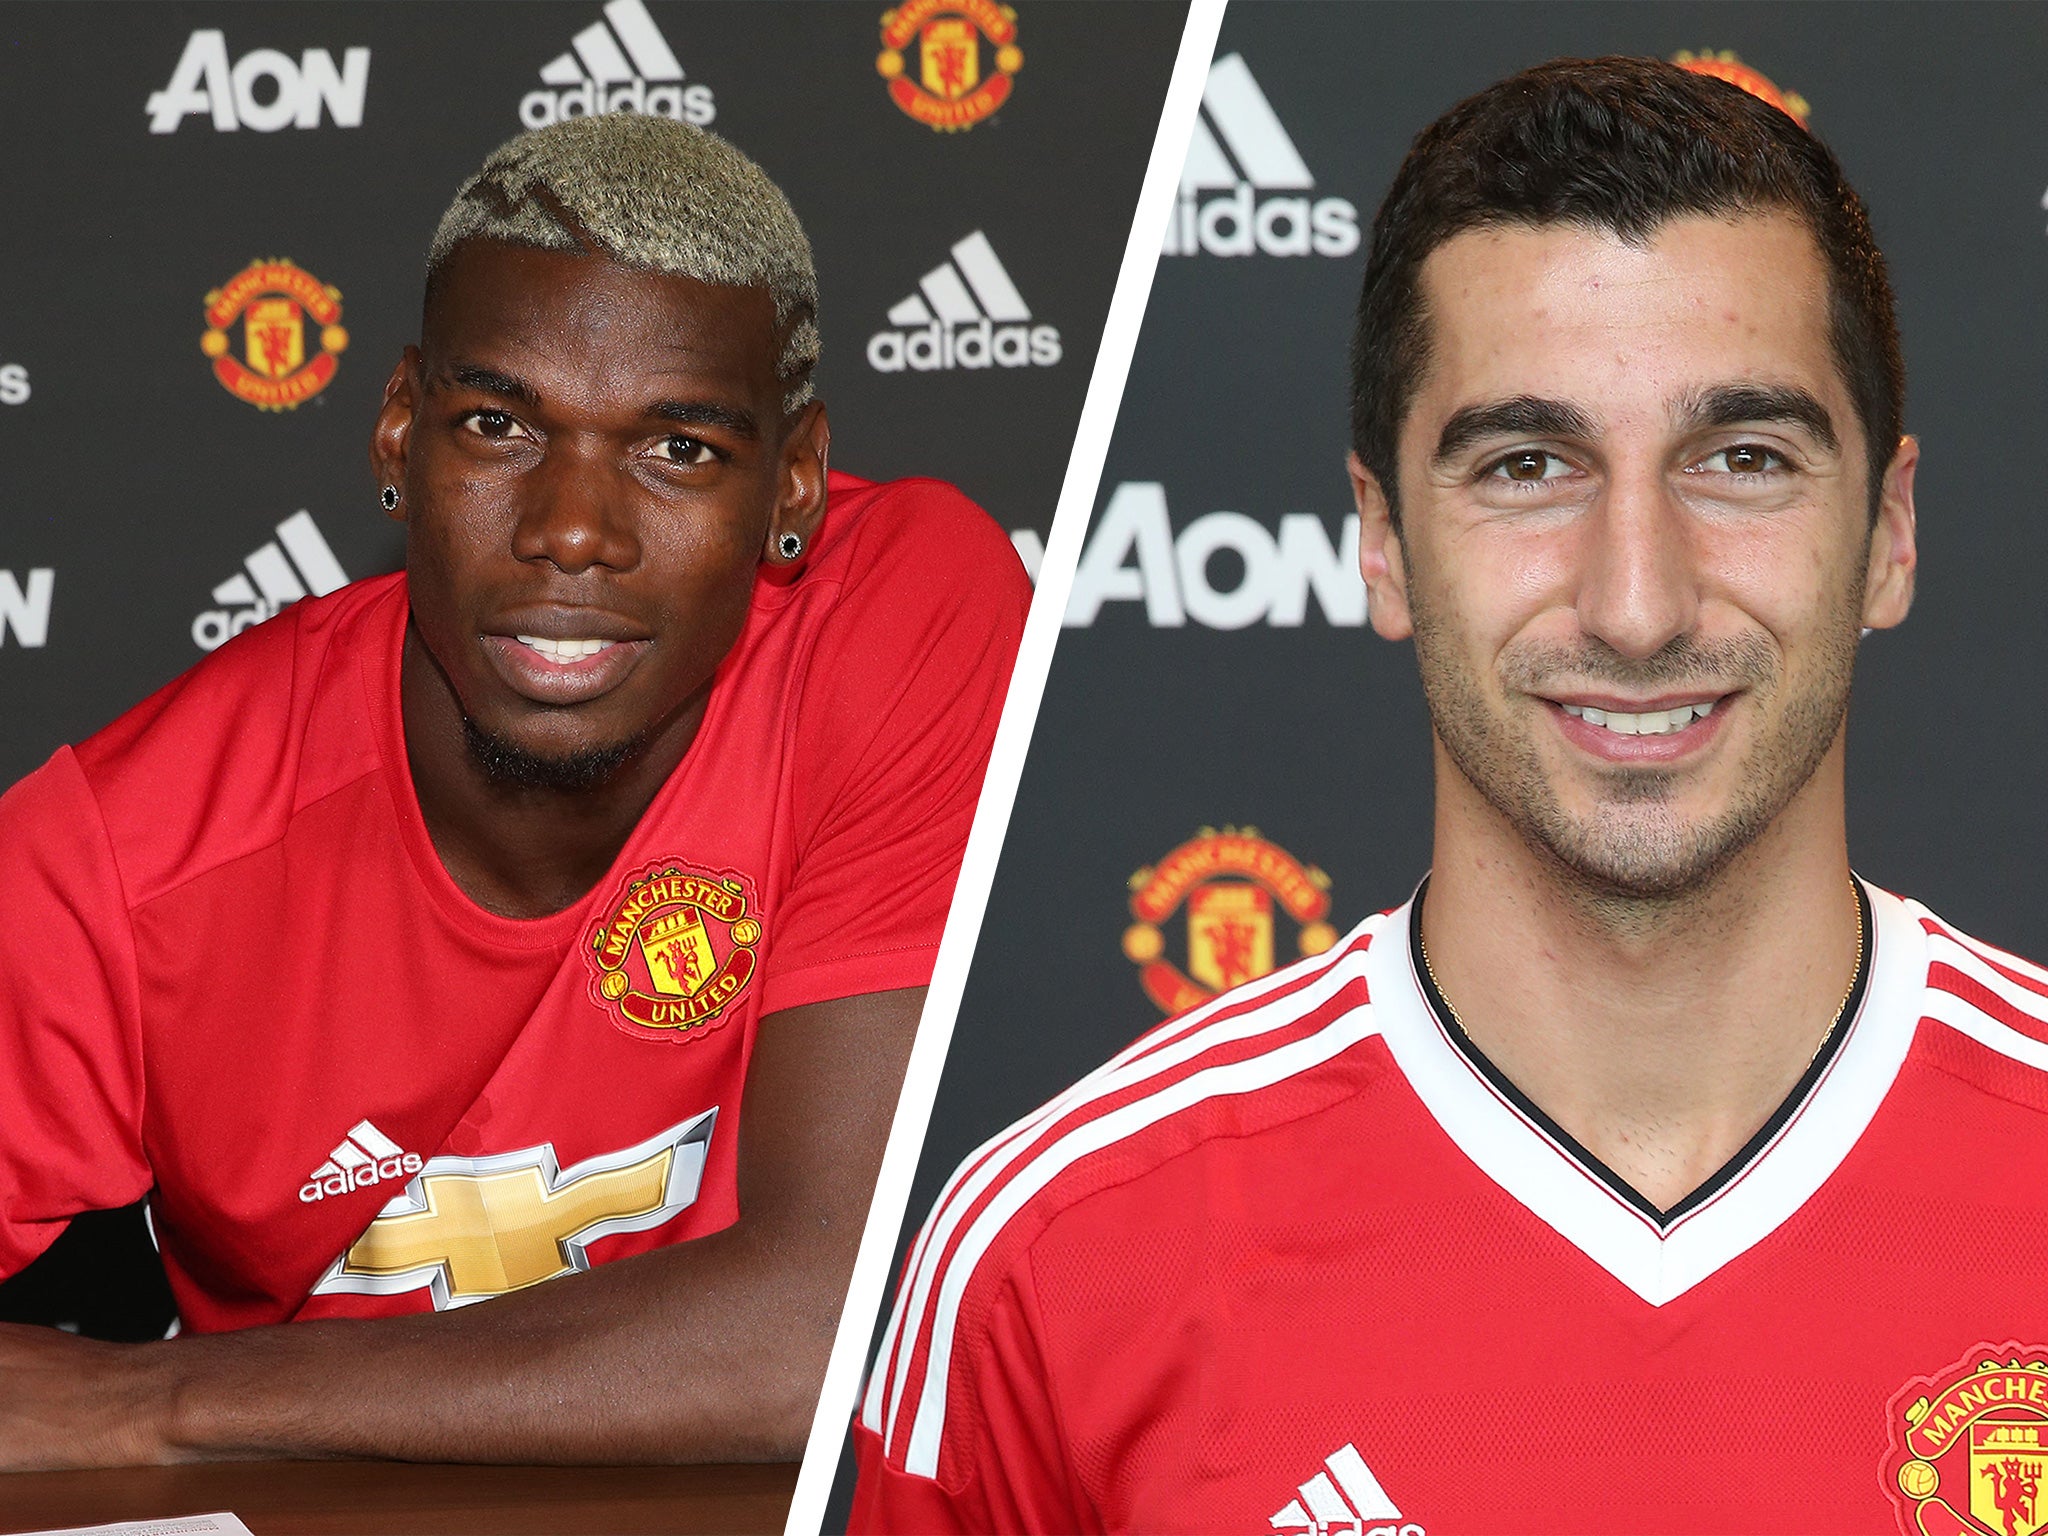 Pogba and Mkhitaryan arrived as part of Mourinho's summer re-build